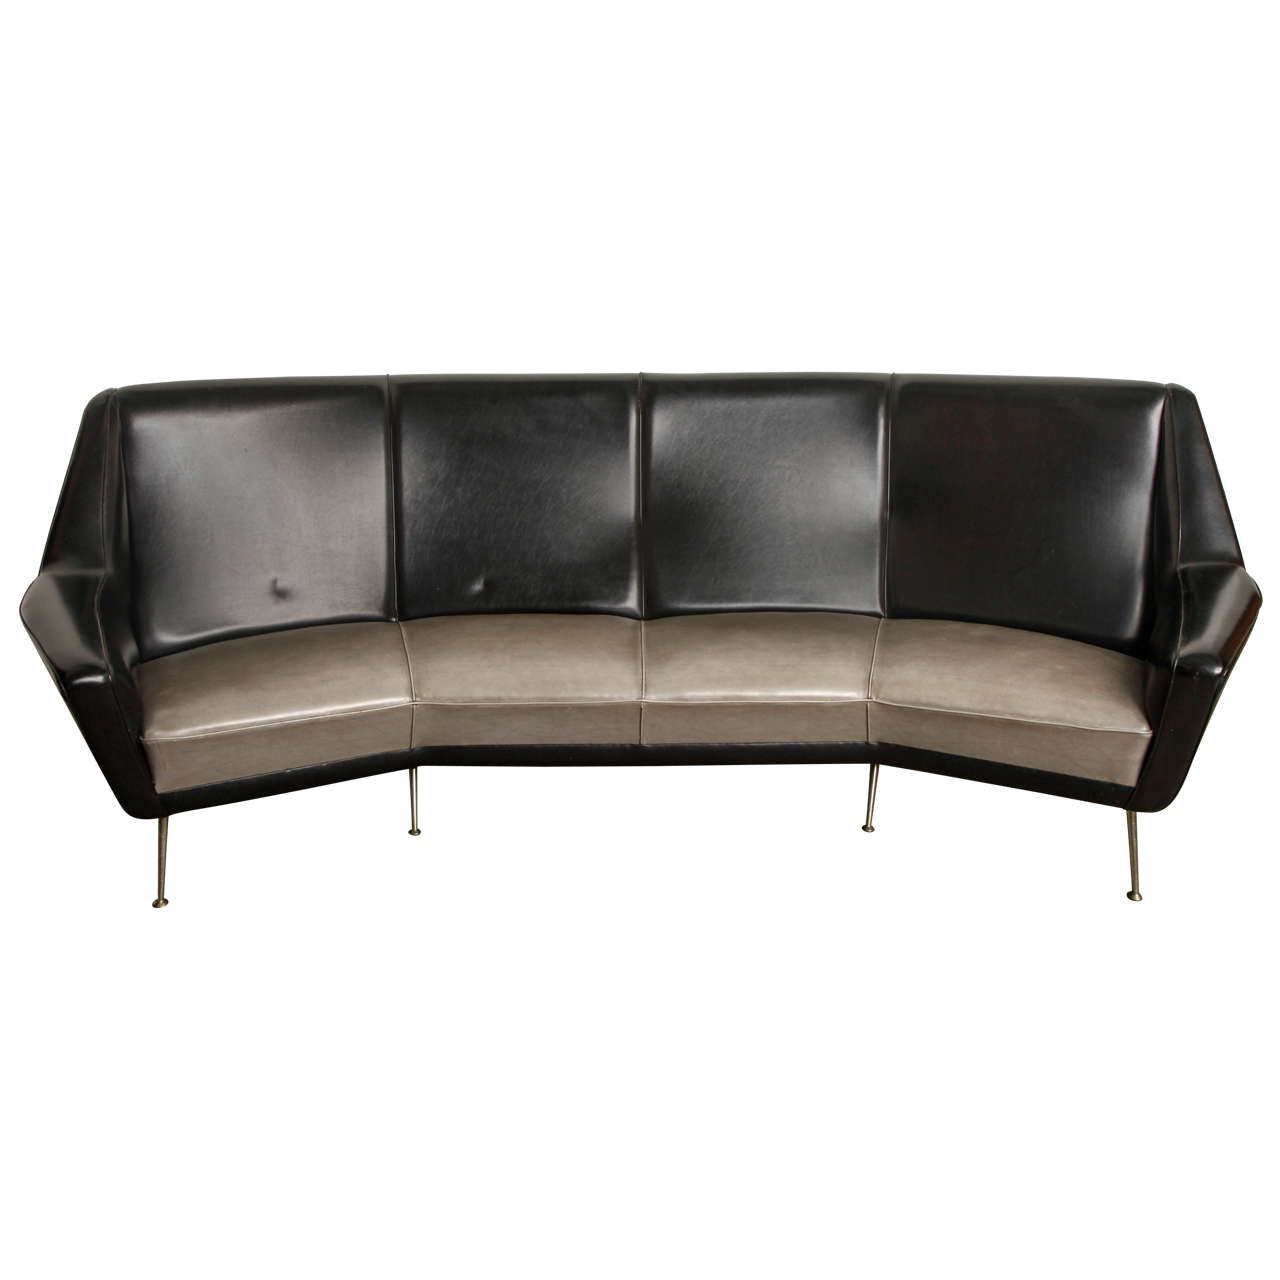 Black Large 1950s Italian Curved Sofa in Style of Gio Ponti